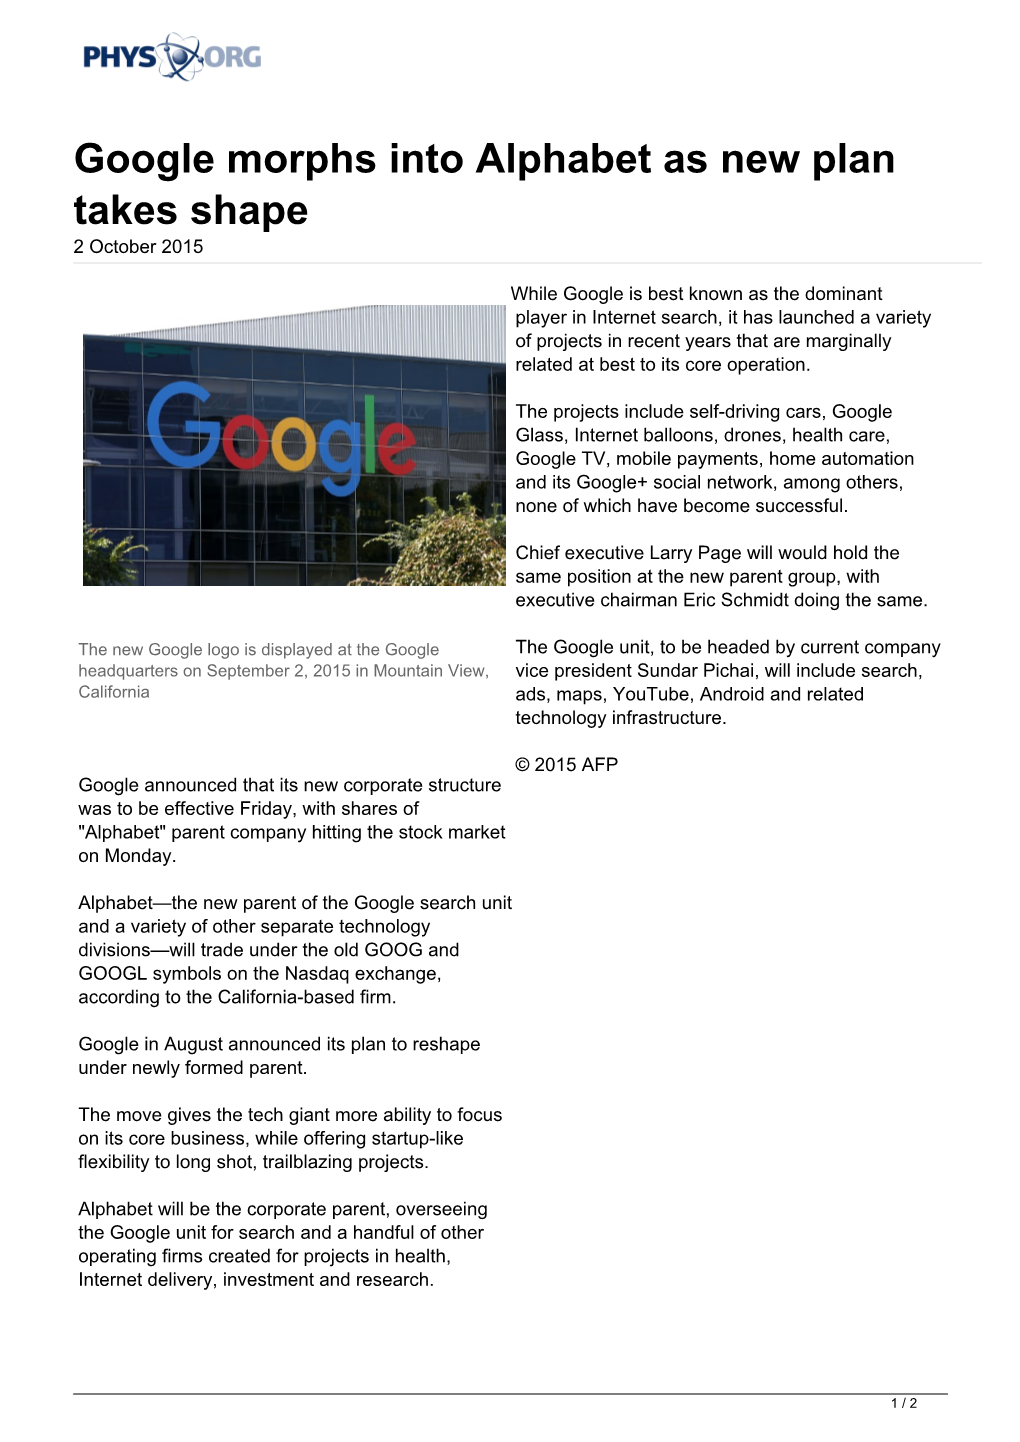 Google Morphs Into Alphabet As New Plan Takes Shape 2 October 2015